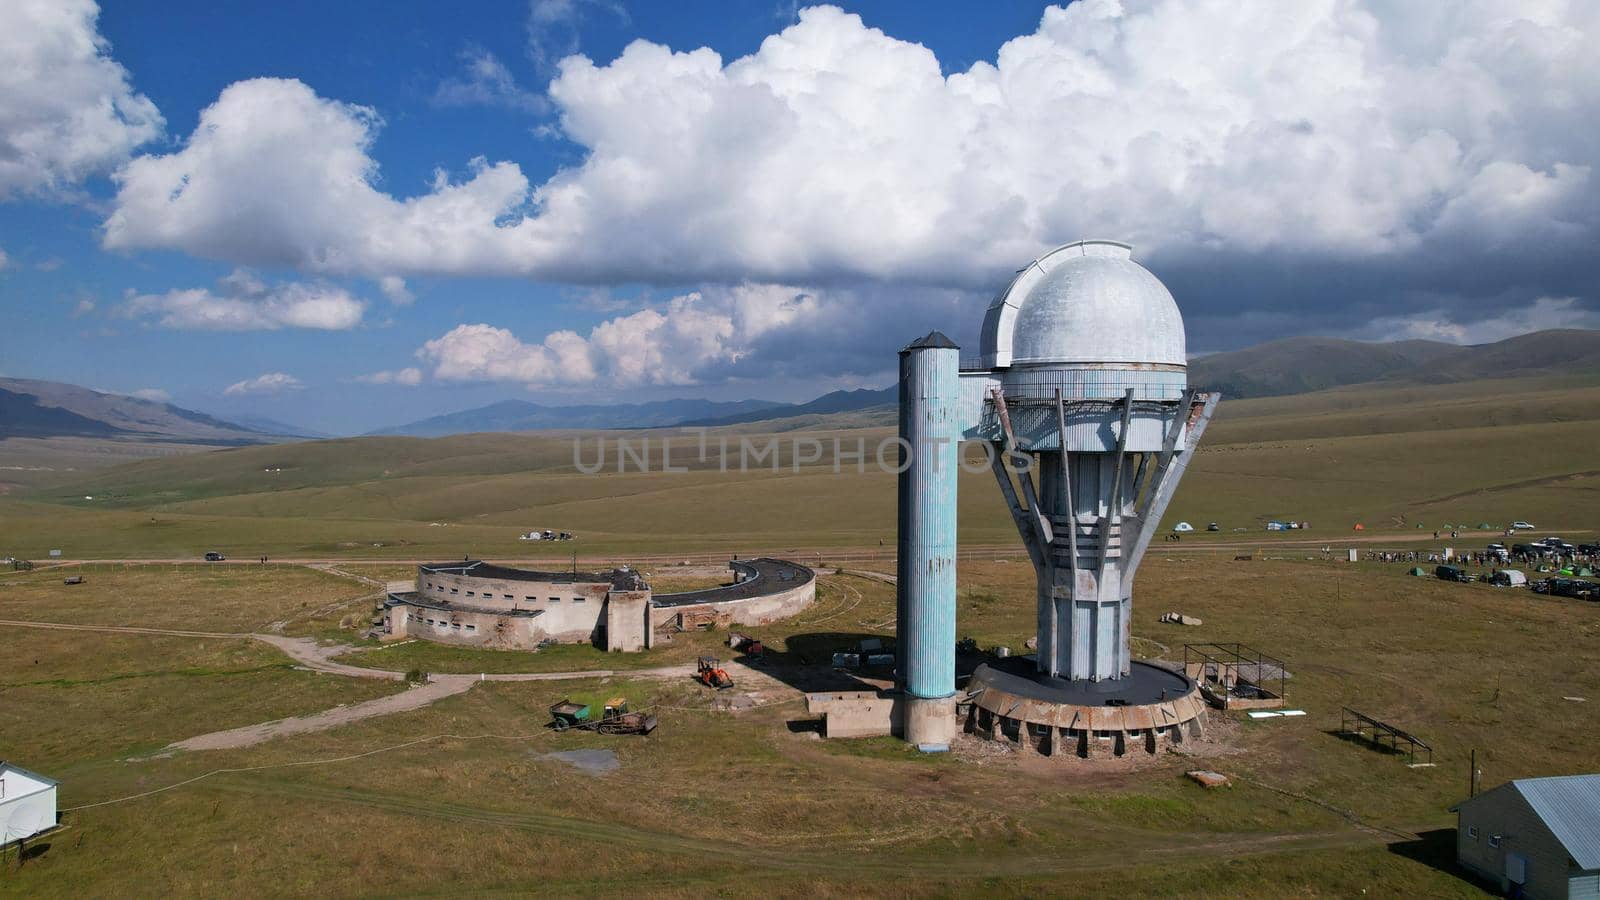 The Assy-Turgen Observatory is high in the mountains. There is a tent camp next to the observatory. Large cumulus clouds in a blue sky. Yellow-green hills, forest in places. Top view from a drone